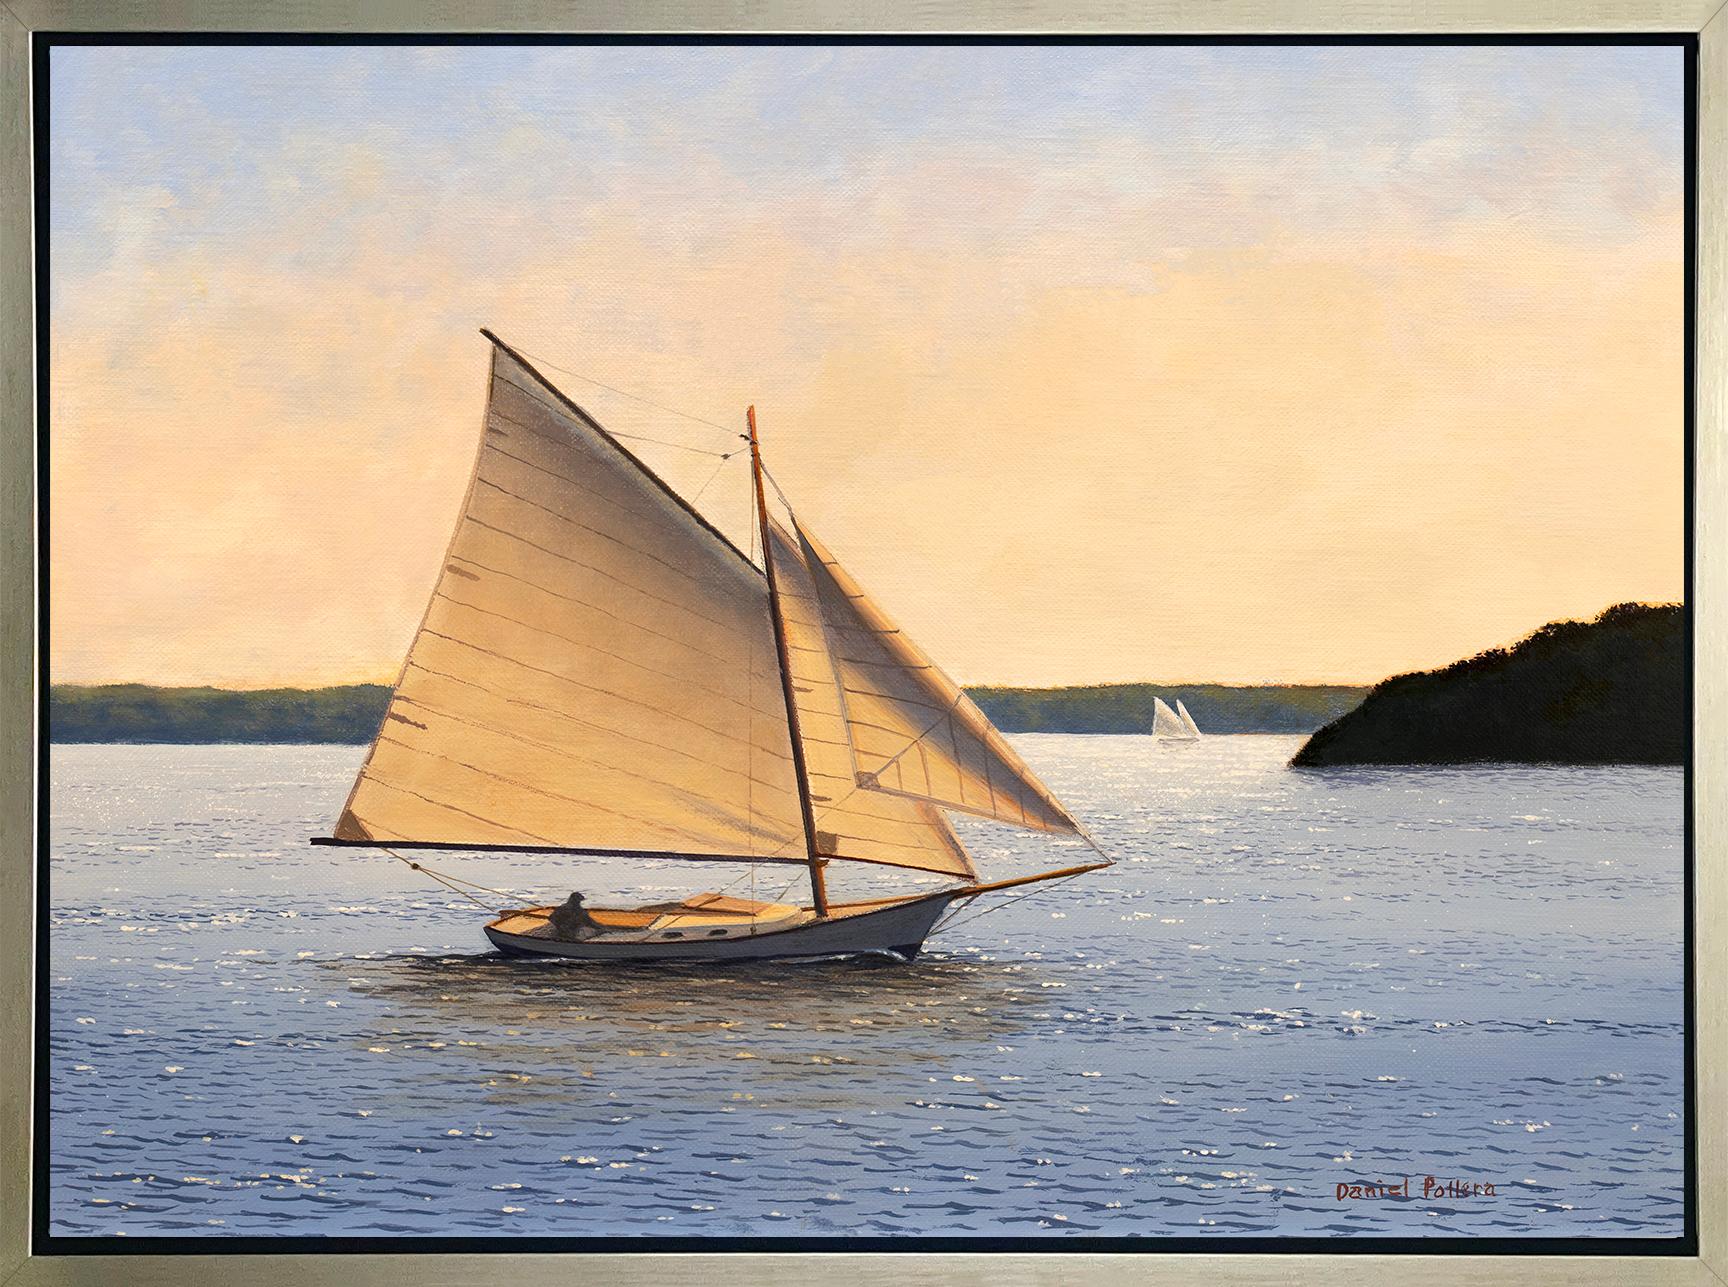 Daniel Pollera Landscape Print - "Sailing Out to Sea, " Framed Limited Edition Giclee Print, 30" x 40"